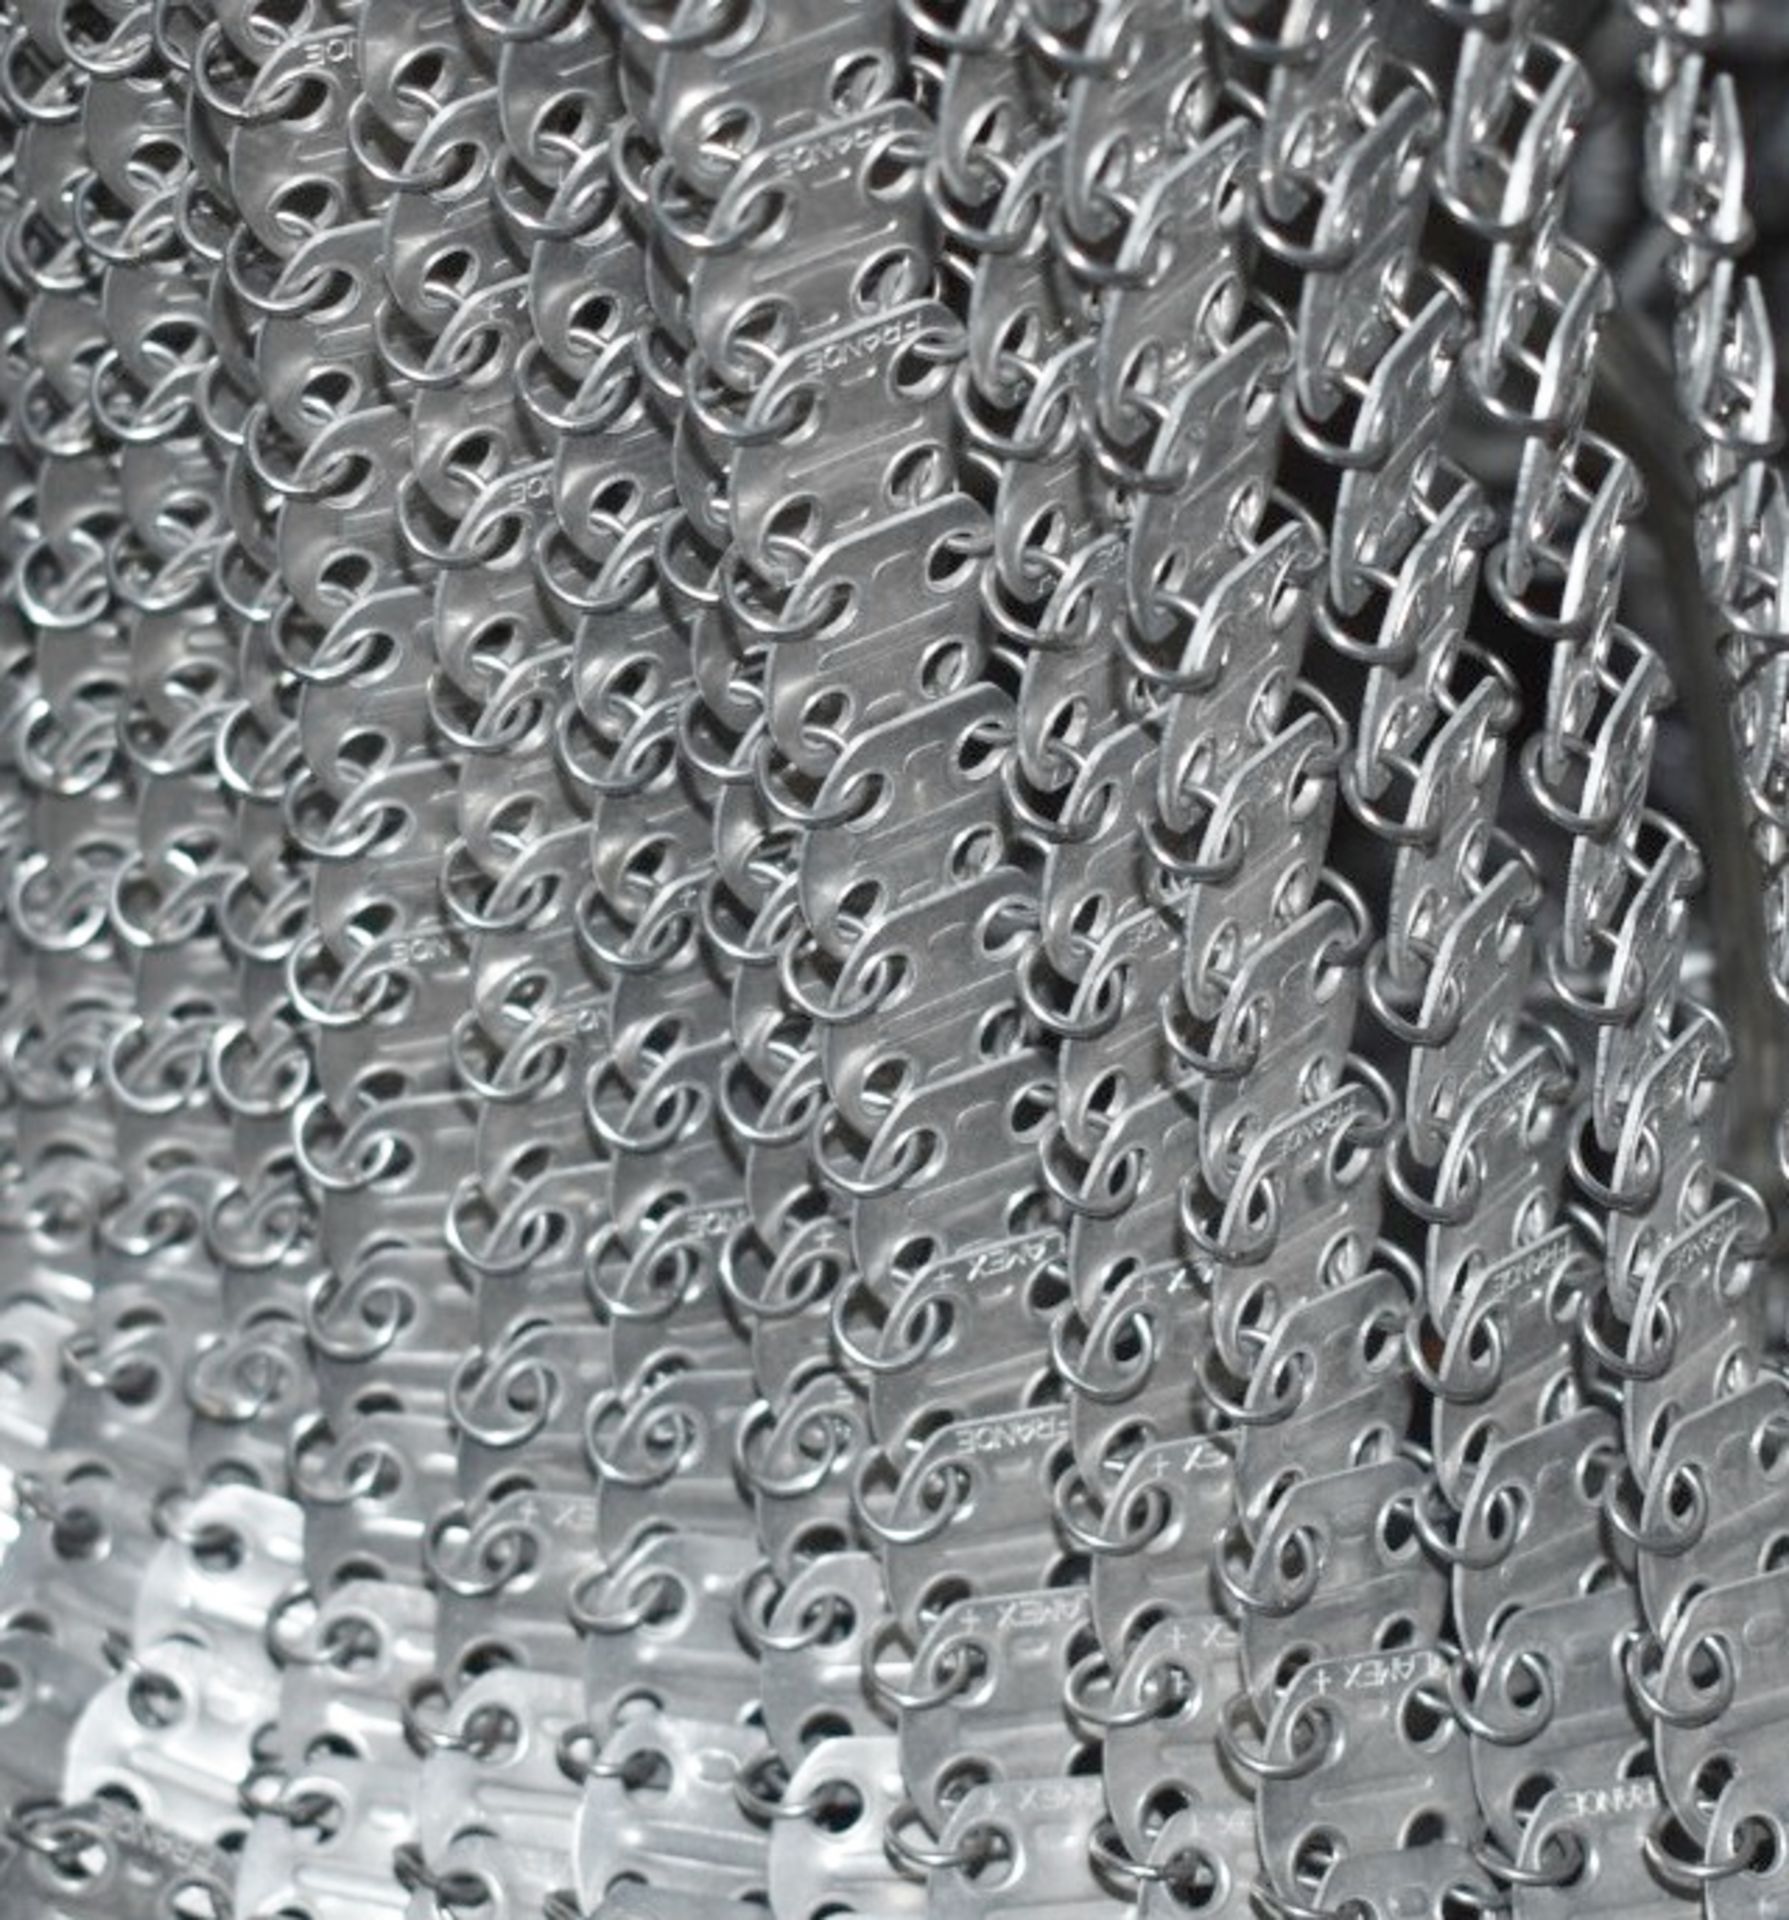 1 x Opulent Chainmail Chandelier with Crystal Glass Droplets - Procured From An Exclusive Property - Image 4 of 8